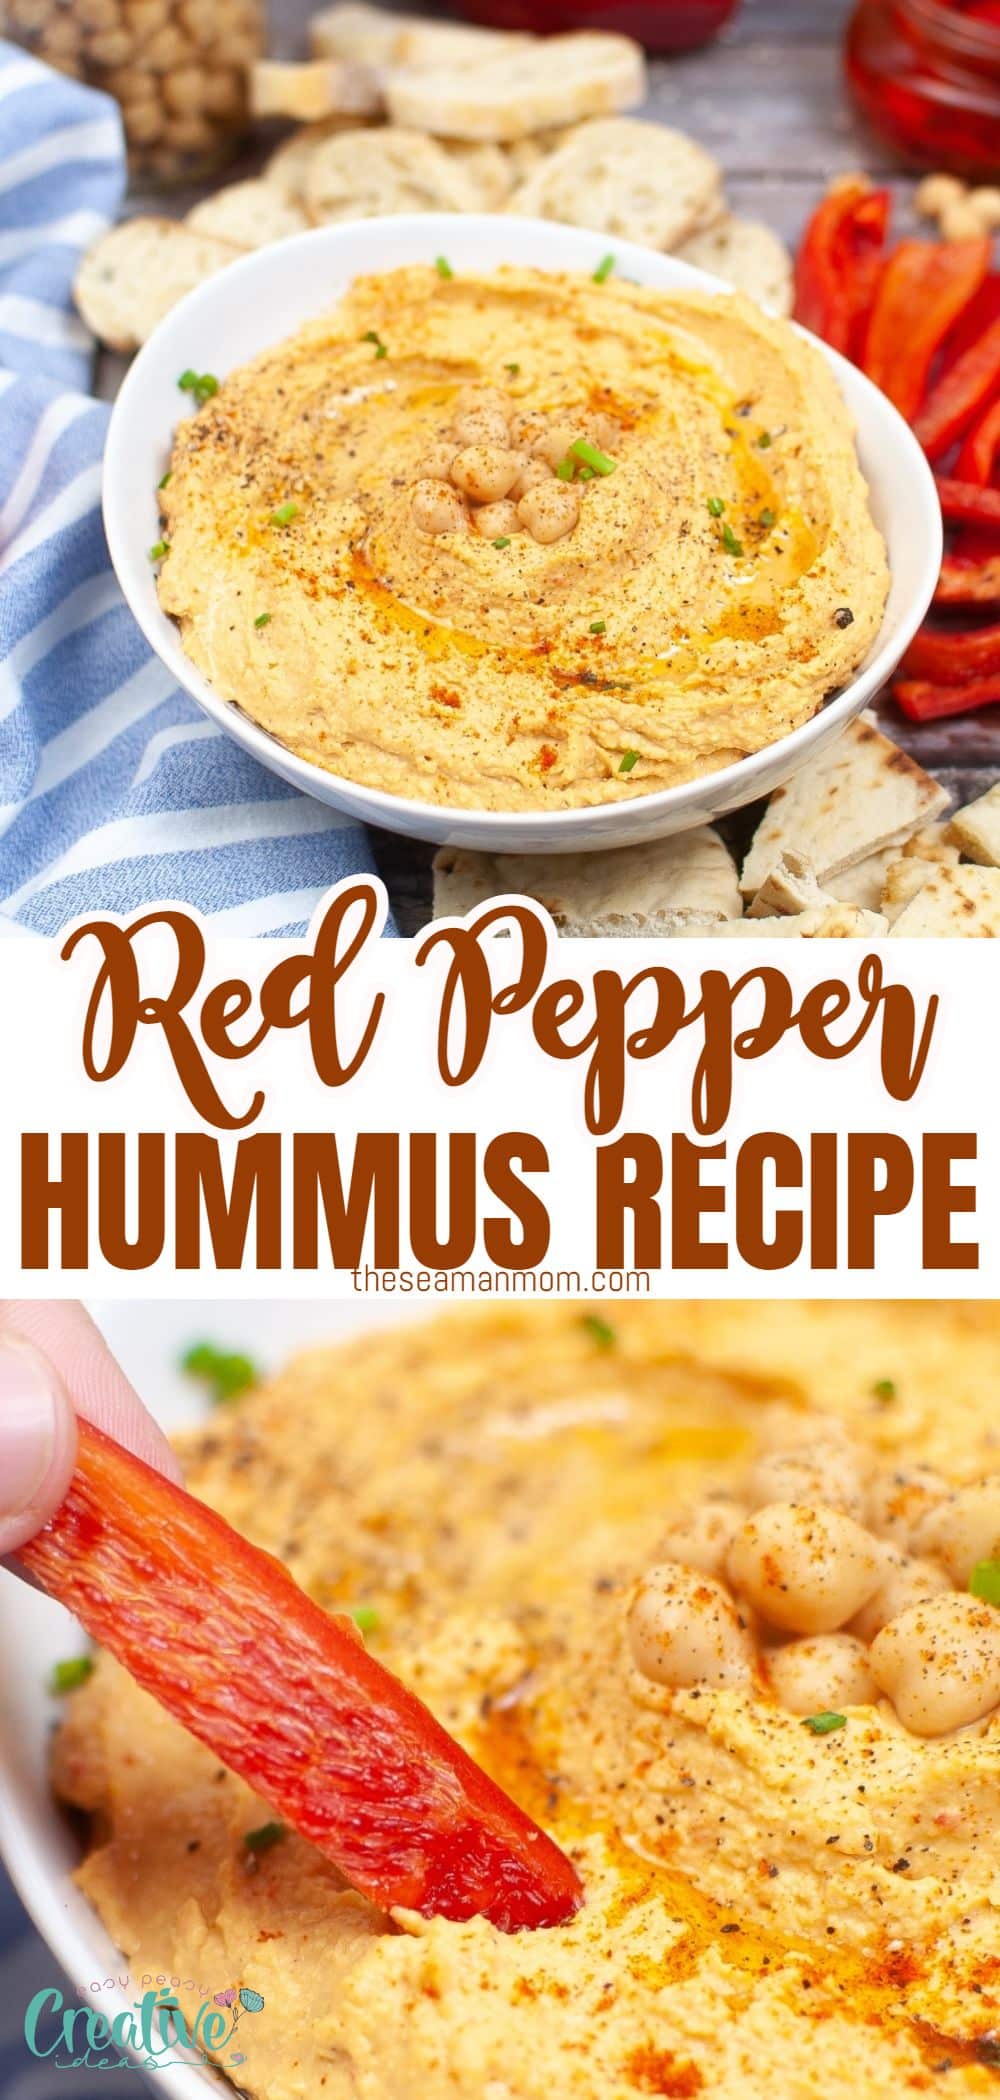 If you're craving a flavorful dip that will liven up your meal, roasted red pepper hummus is the perfect option! This creamy and flavorful roasted red pepper hummus is made from garbanzo beans, tahini, red peppers, and a variety of flavorful seasonings. It's perfect for dipping with chips or vegetables, adding to a sandwich, or simply enjoying it on its own.  via @petroneagu